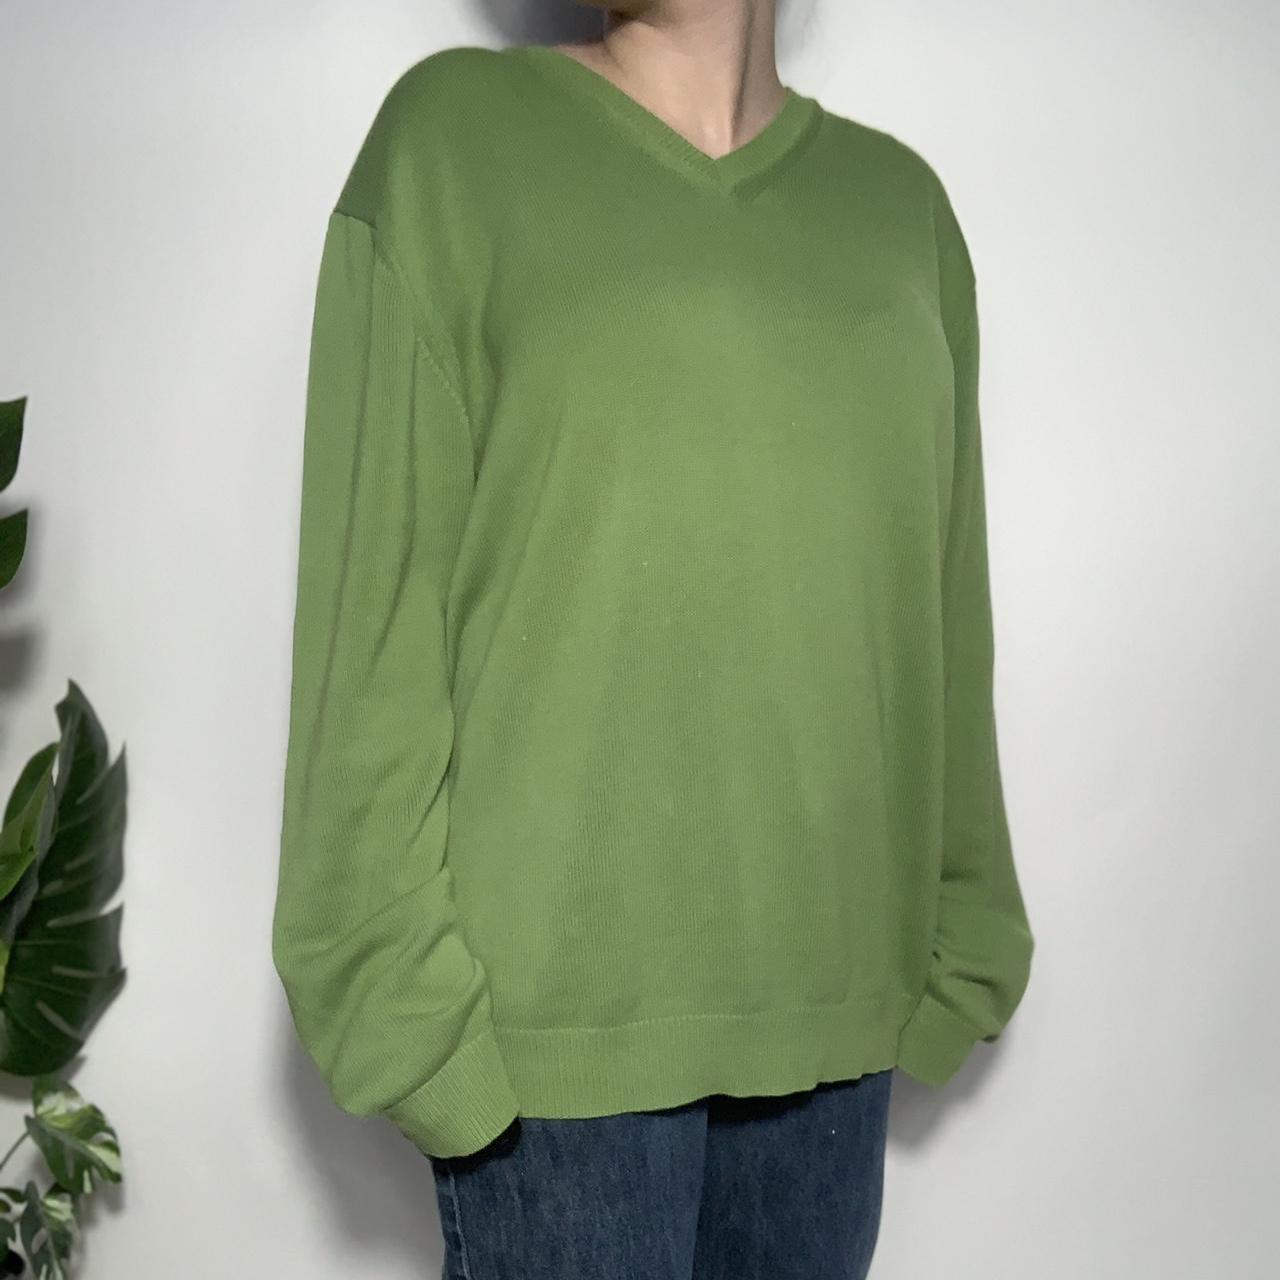 Burberry vintage 90s green knitted pullover jumper